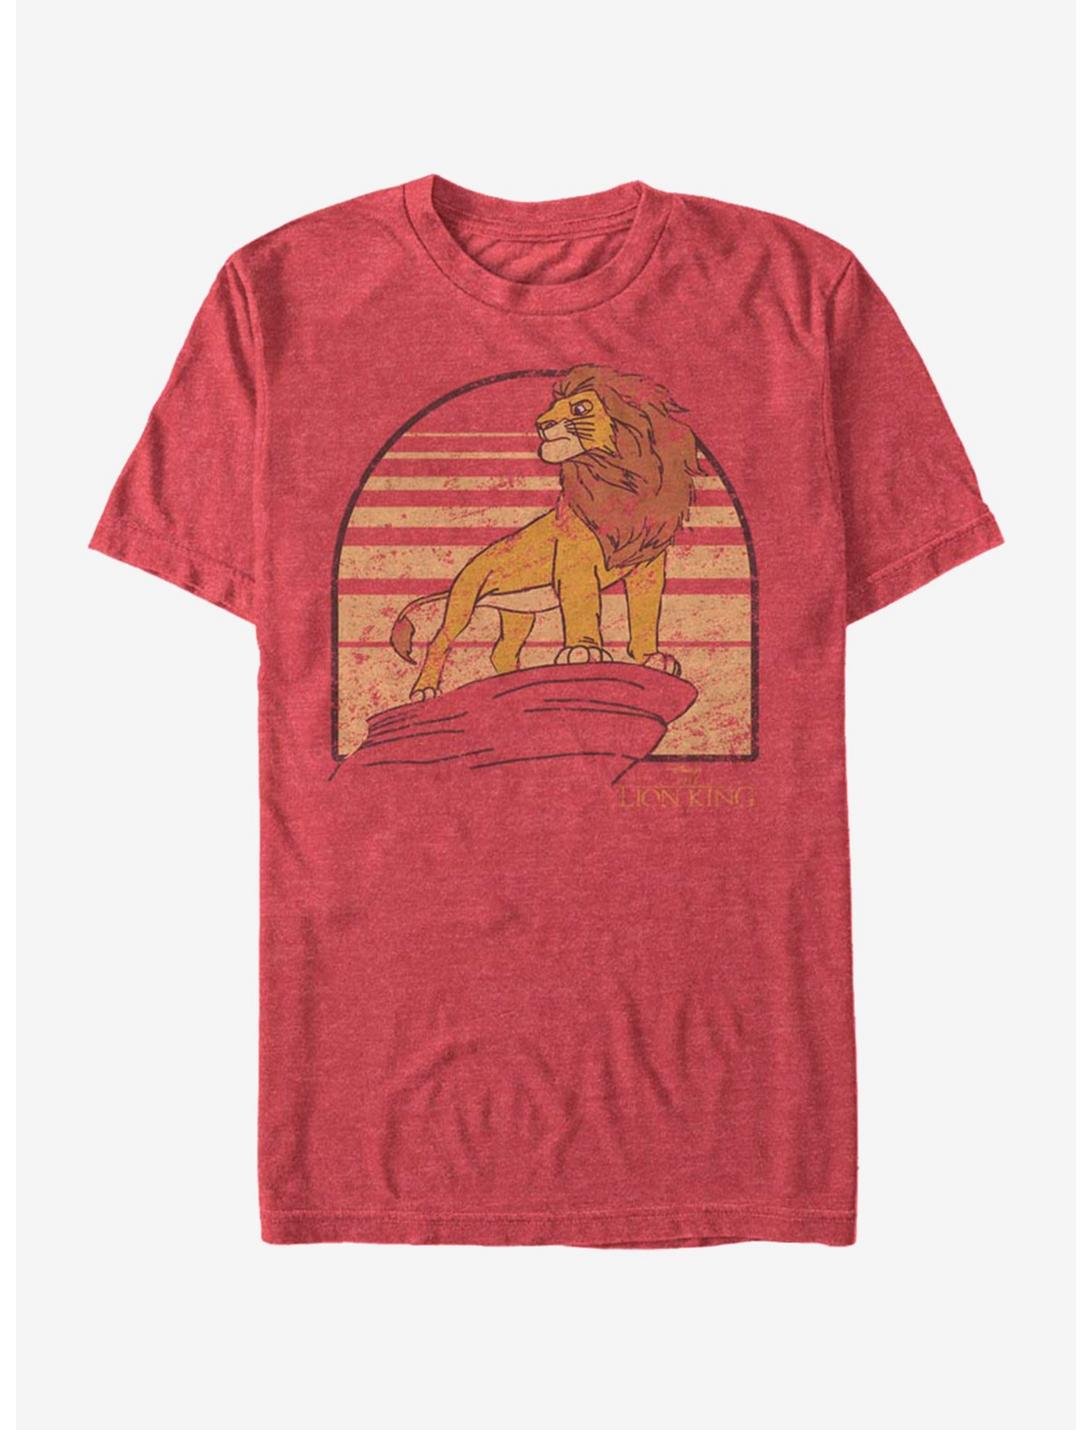 Disney The Lion King King's Throne T-Shirt, RED HTR, hi-res